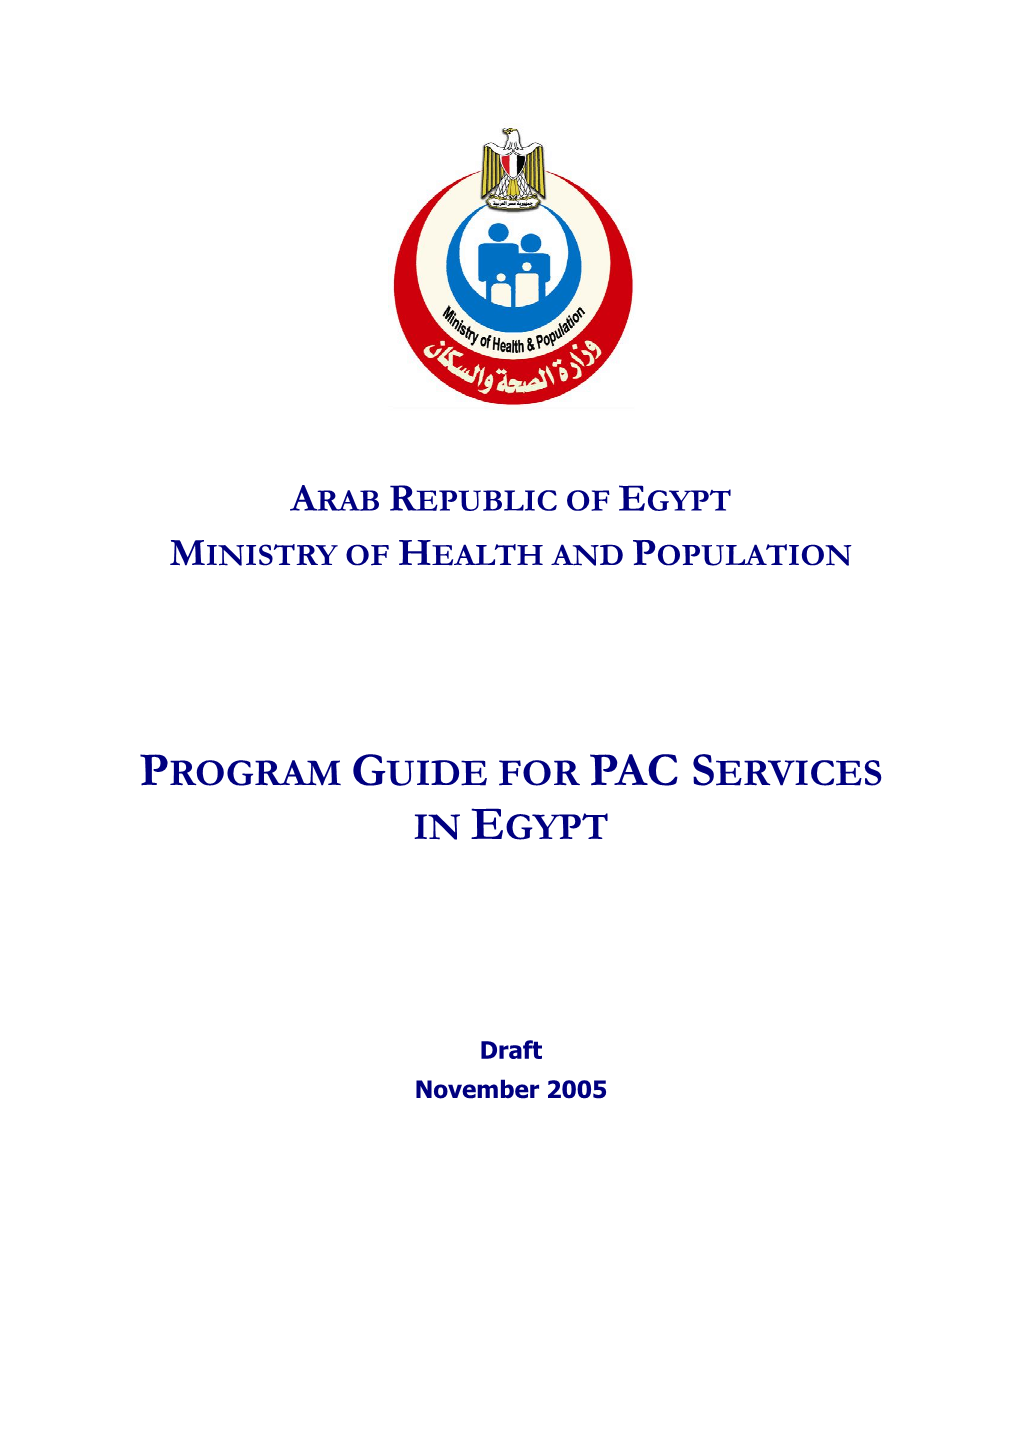 Program Guide for PAC Services in Egypt